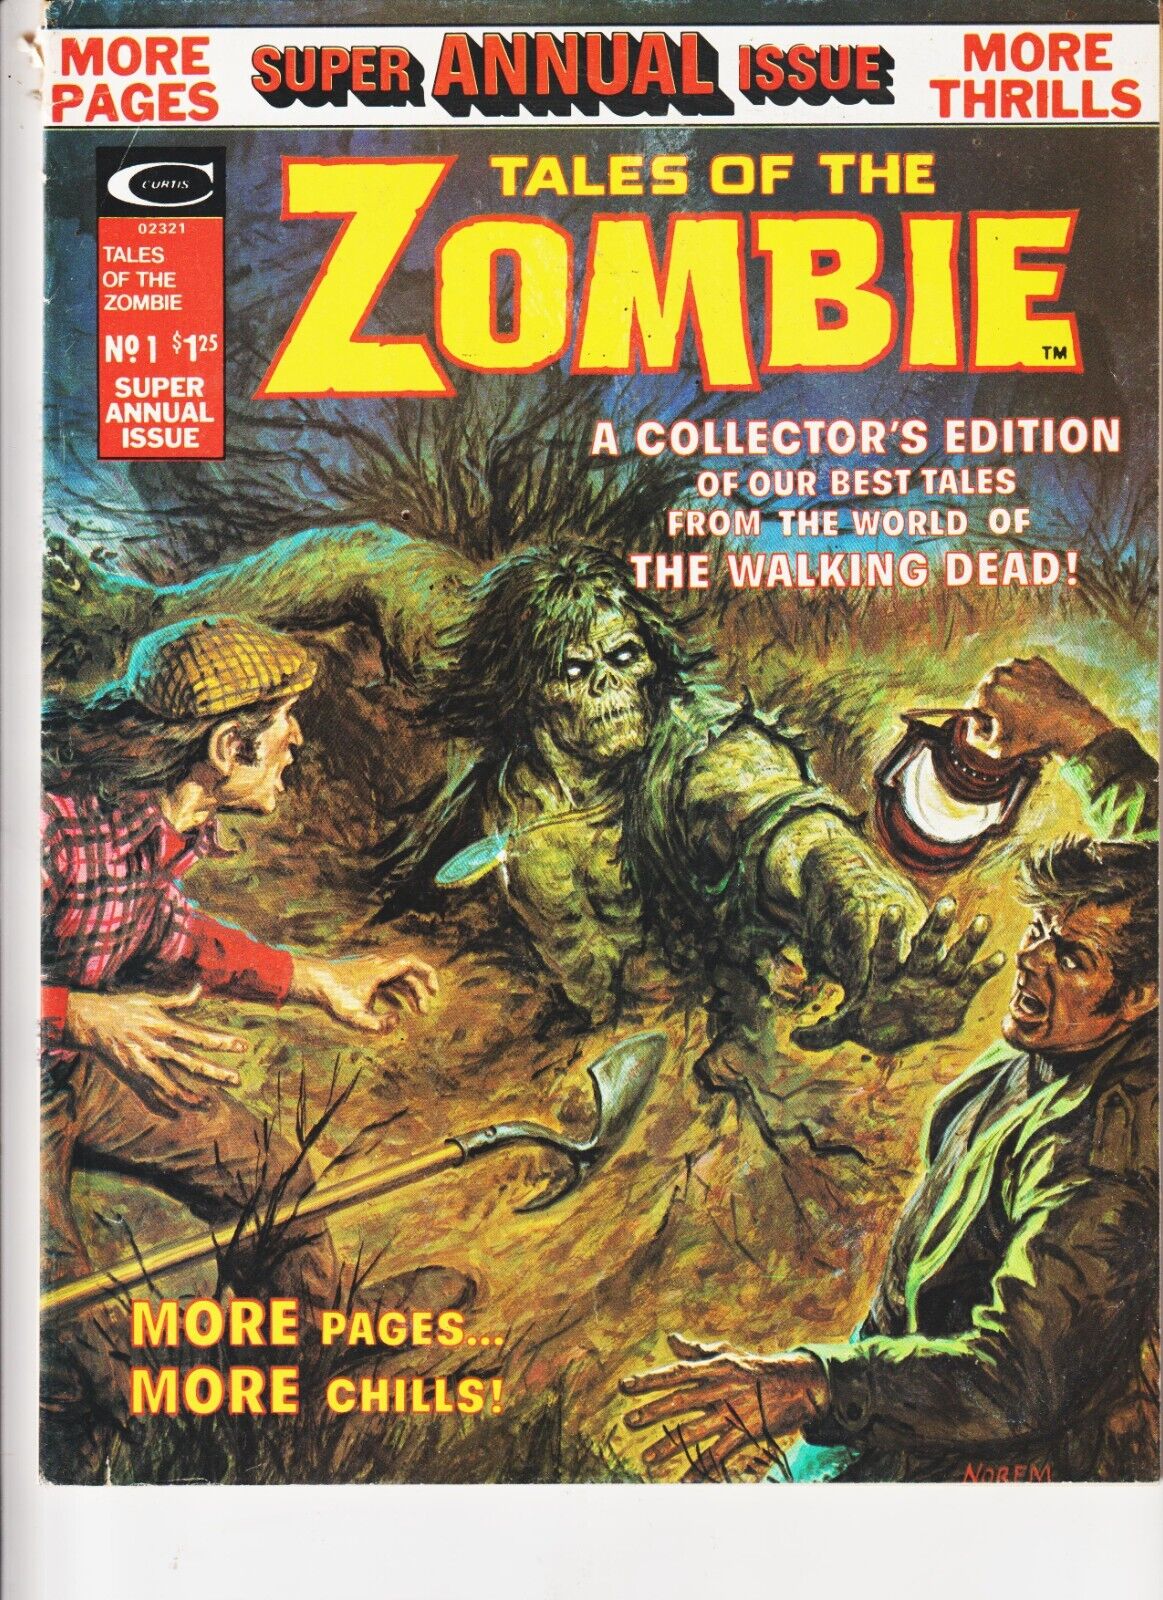 TALES OF THE ZOMBIE MARVEL HORROR COMIC Magazine ANNUAL 1, EARL NOREM COVER